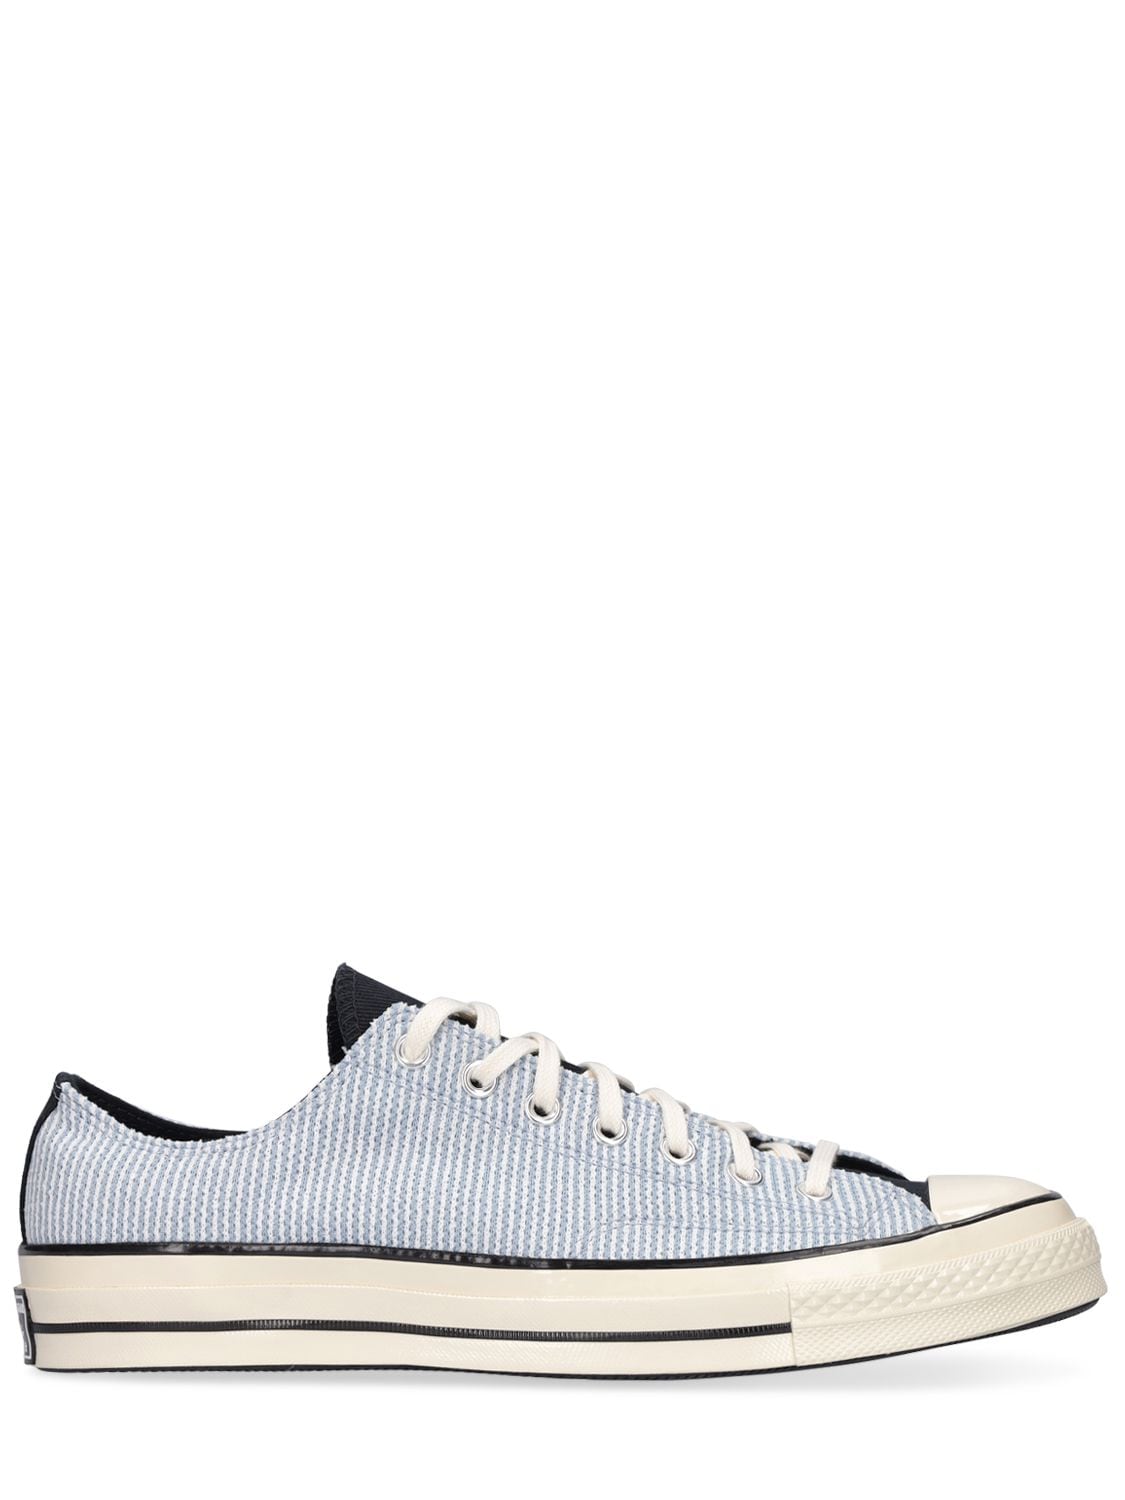 Image of Chuck 70 Low Workwear Sneakers